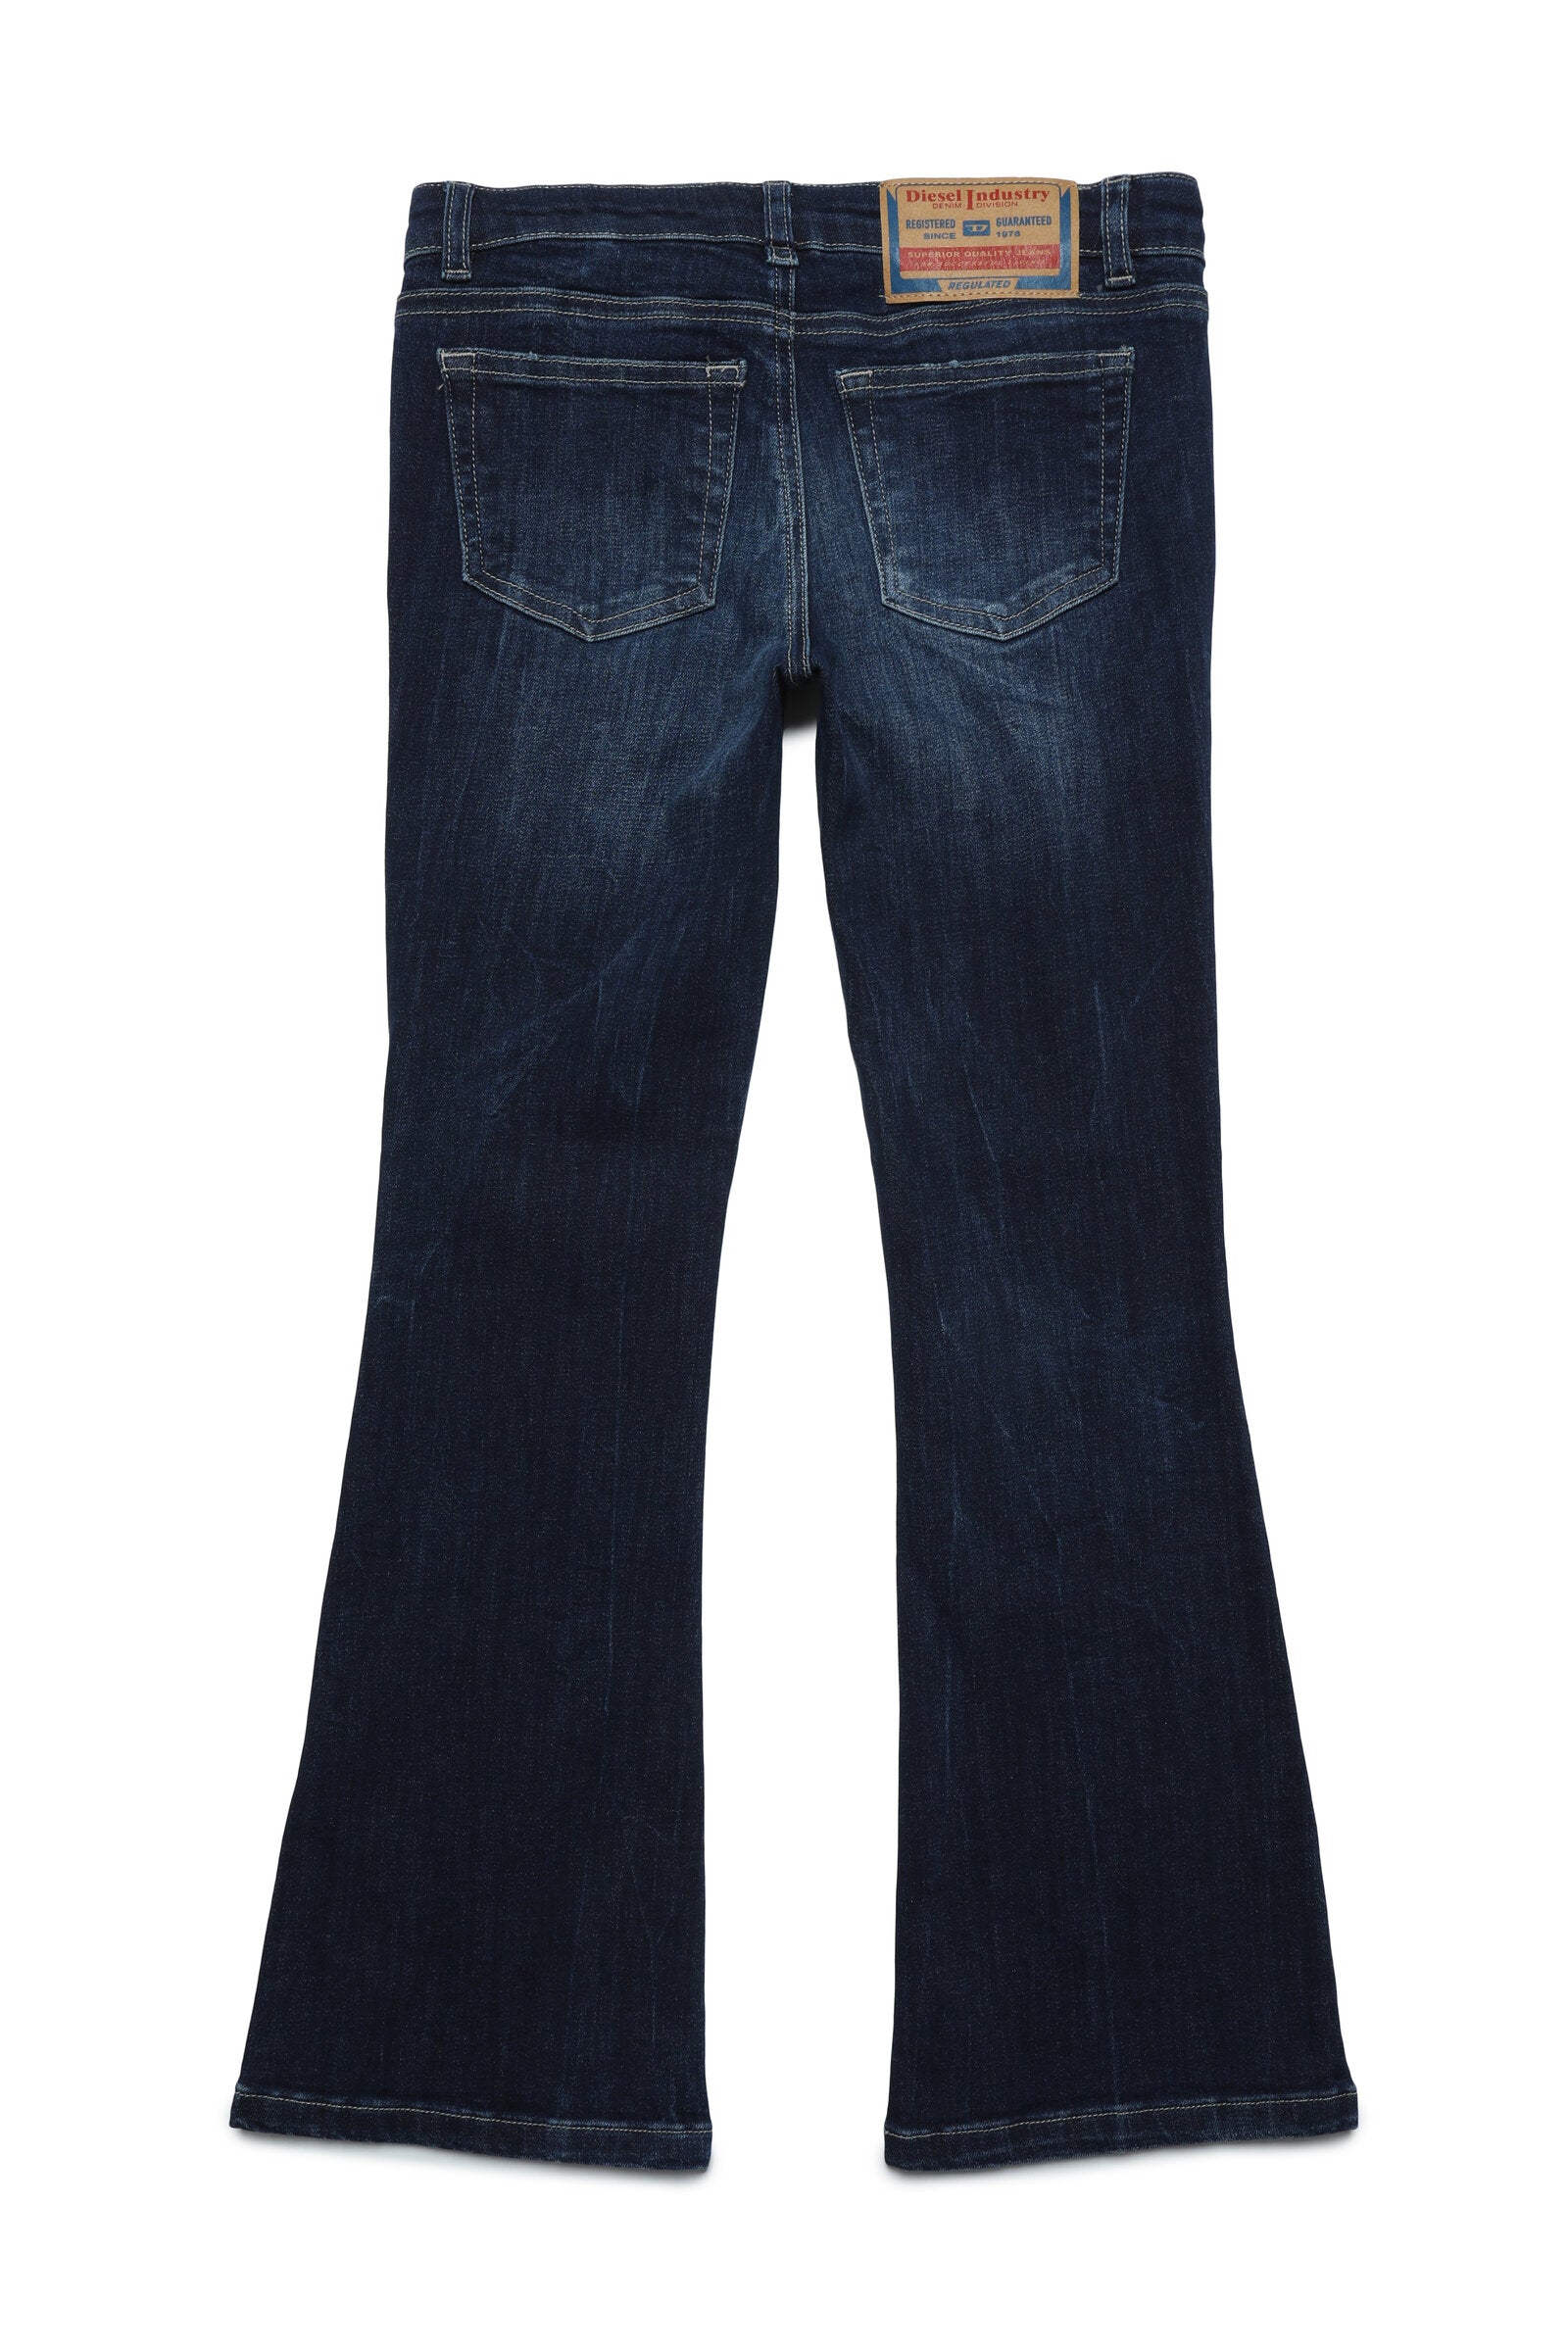 Jeans 1969 D-Ebbey bootcut dark blue with abrasions